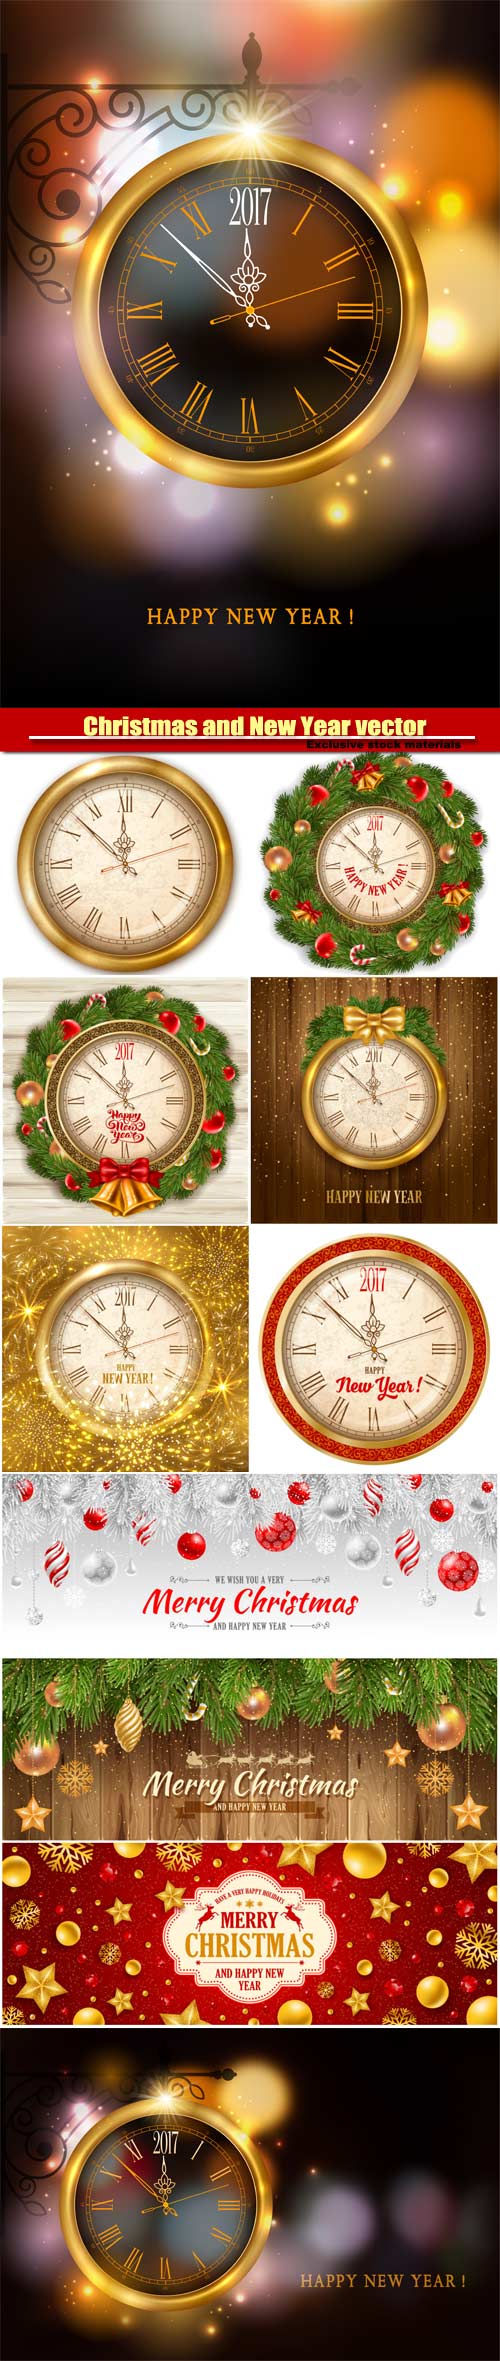 Christmas and New Year vector, clock on bracket with 2017